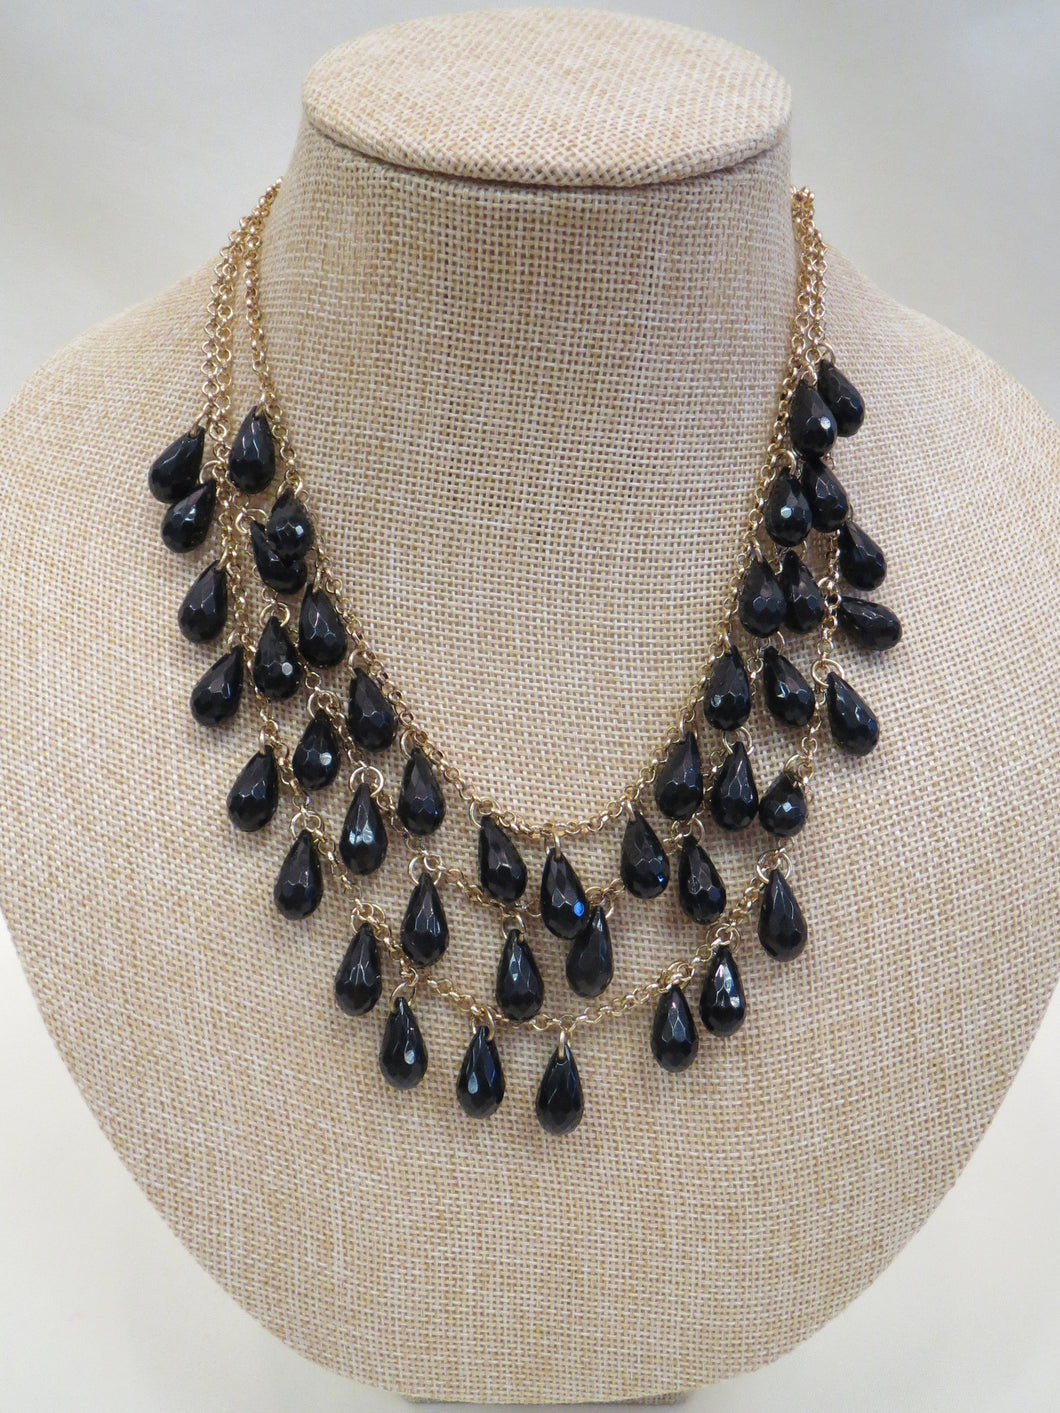 ADO Three Layer Black & Gold Necklace | All Dec'd Out